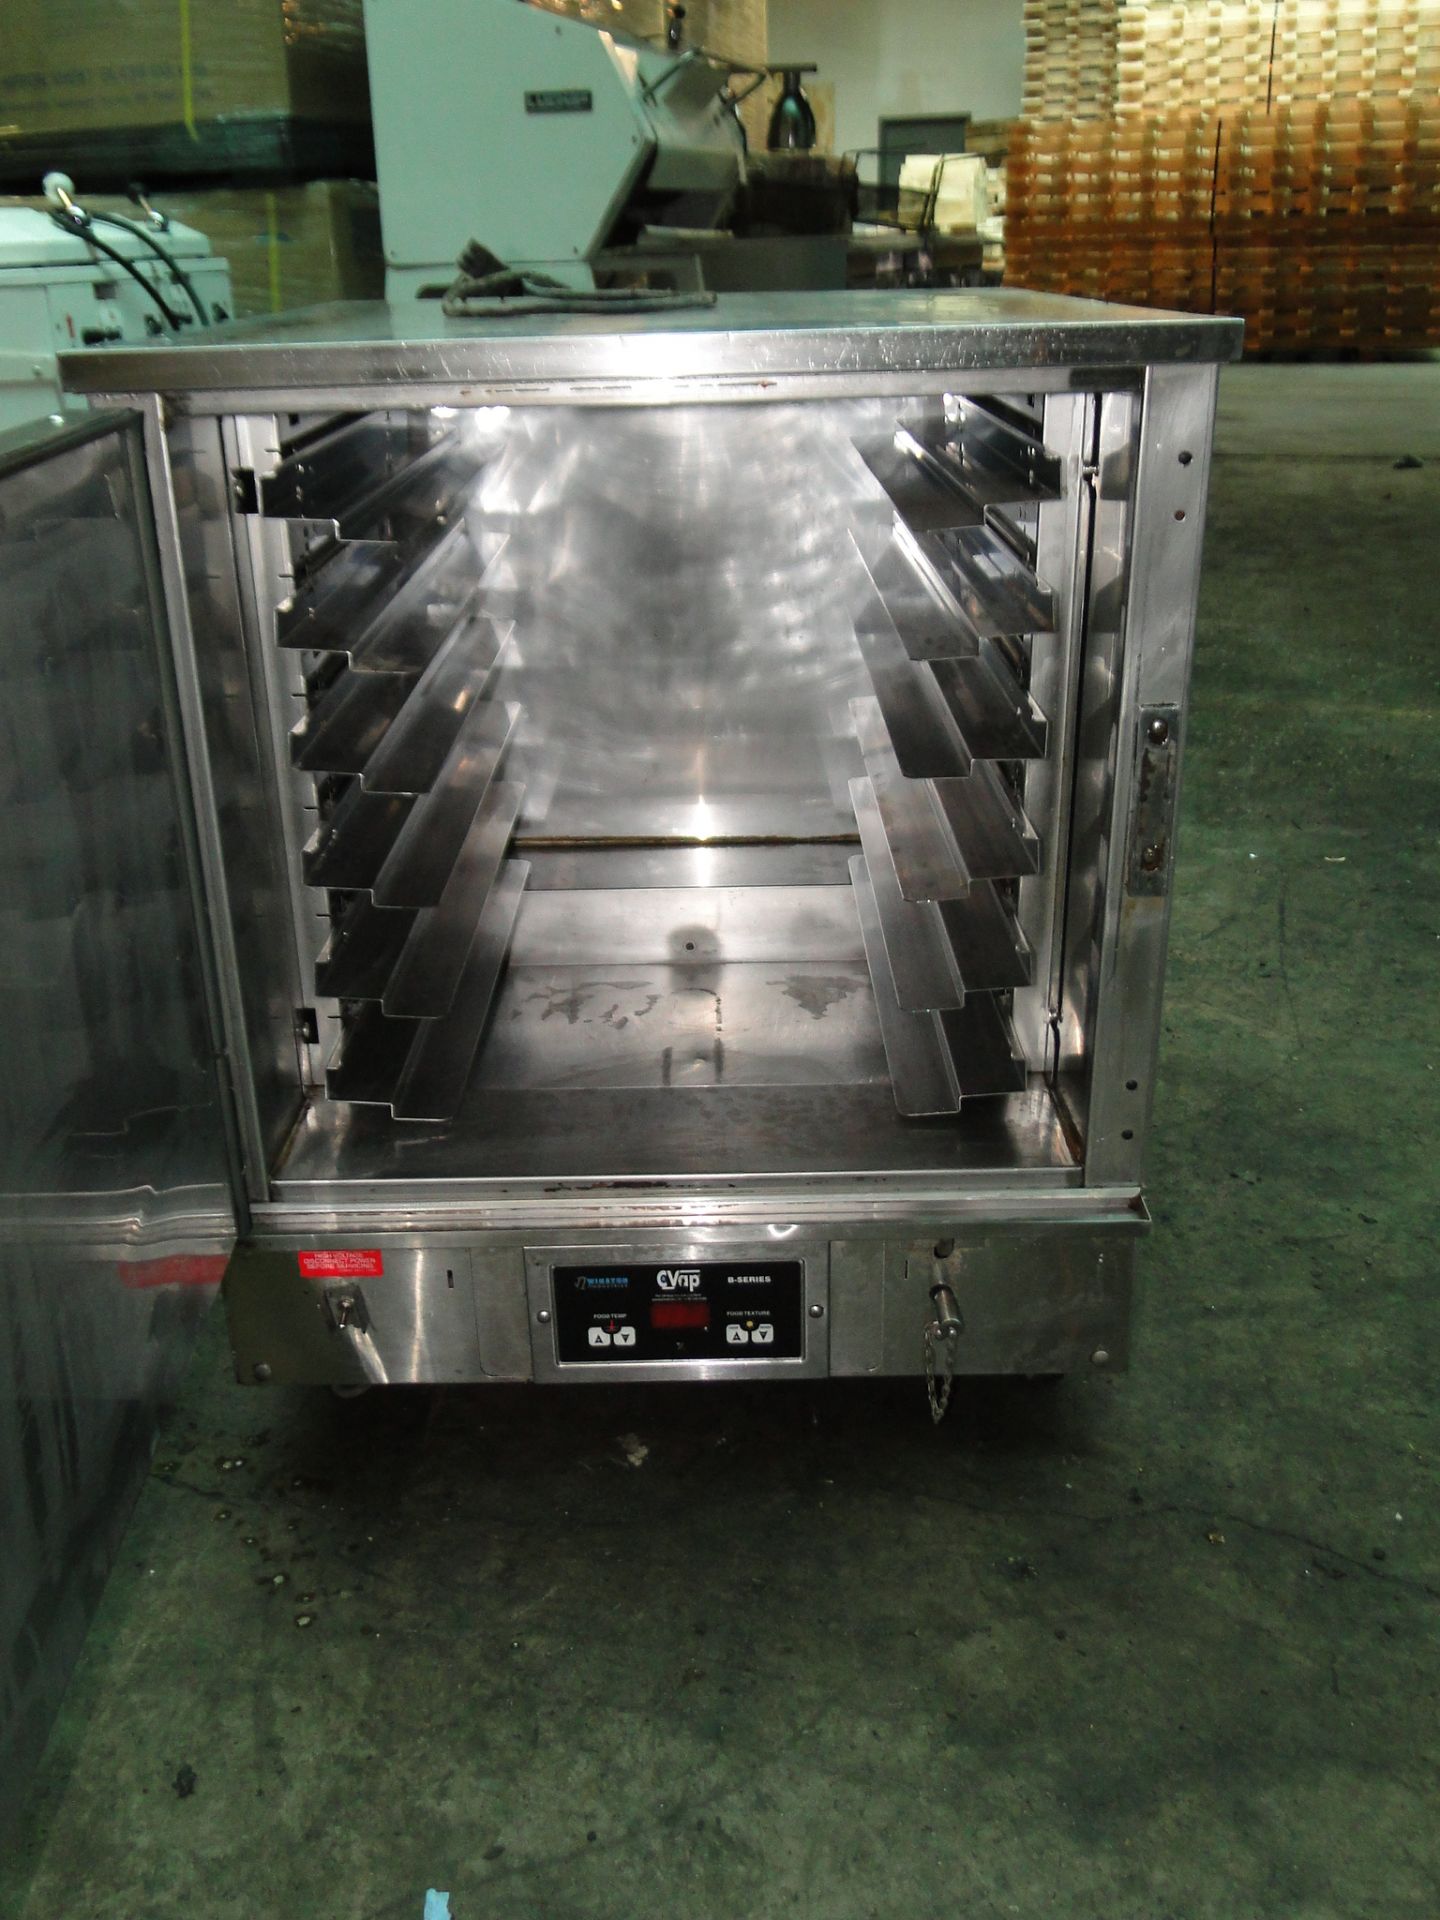 Winston "6 Tray" Electric Heat Hold / Warming Cabinet, Model HC4009GE, S/N: 20051010-032, 120 Volt - Image 3 of 5